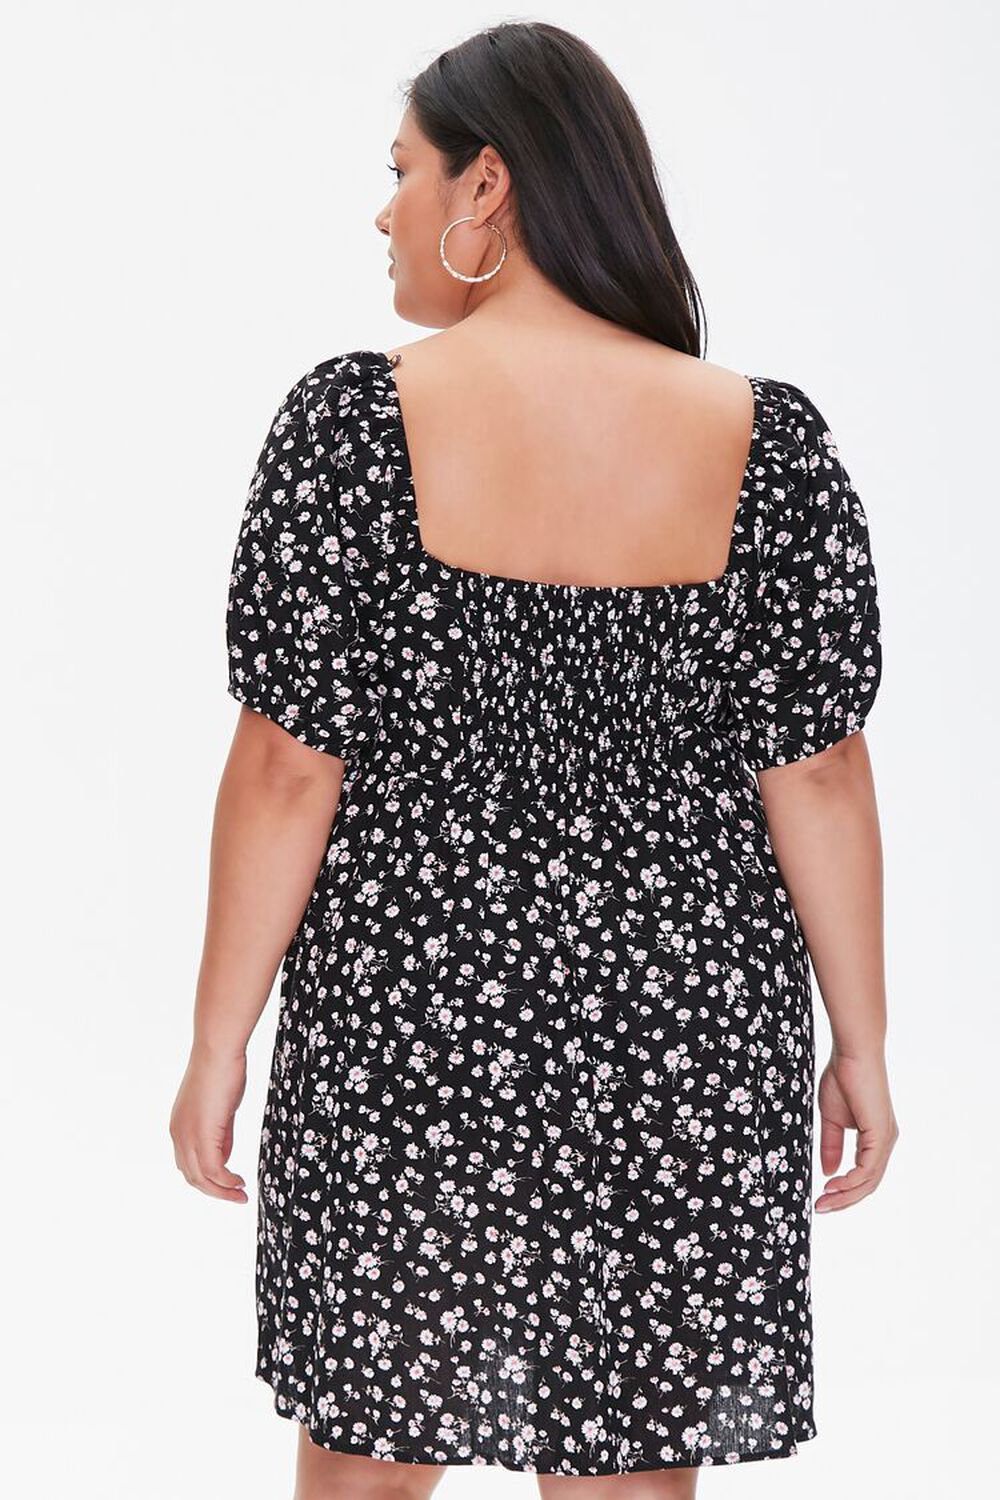 BLACK/CORAL Plus Size Floral Puff-Sleeve Dress, image 3